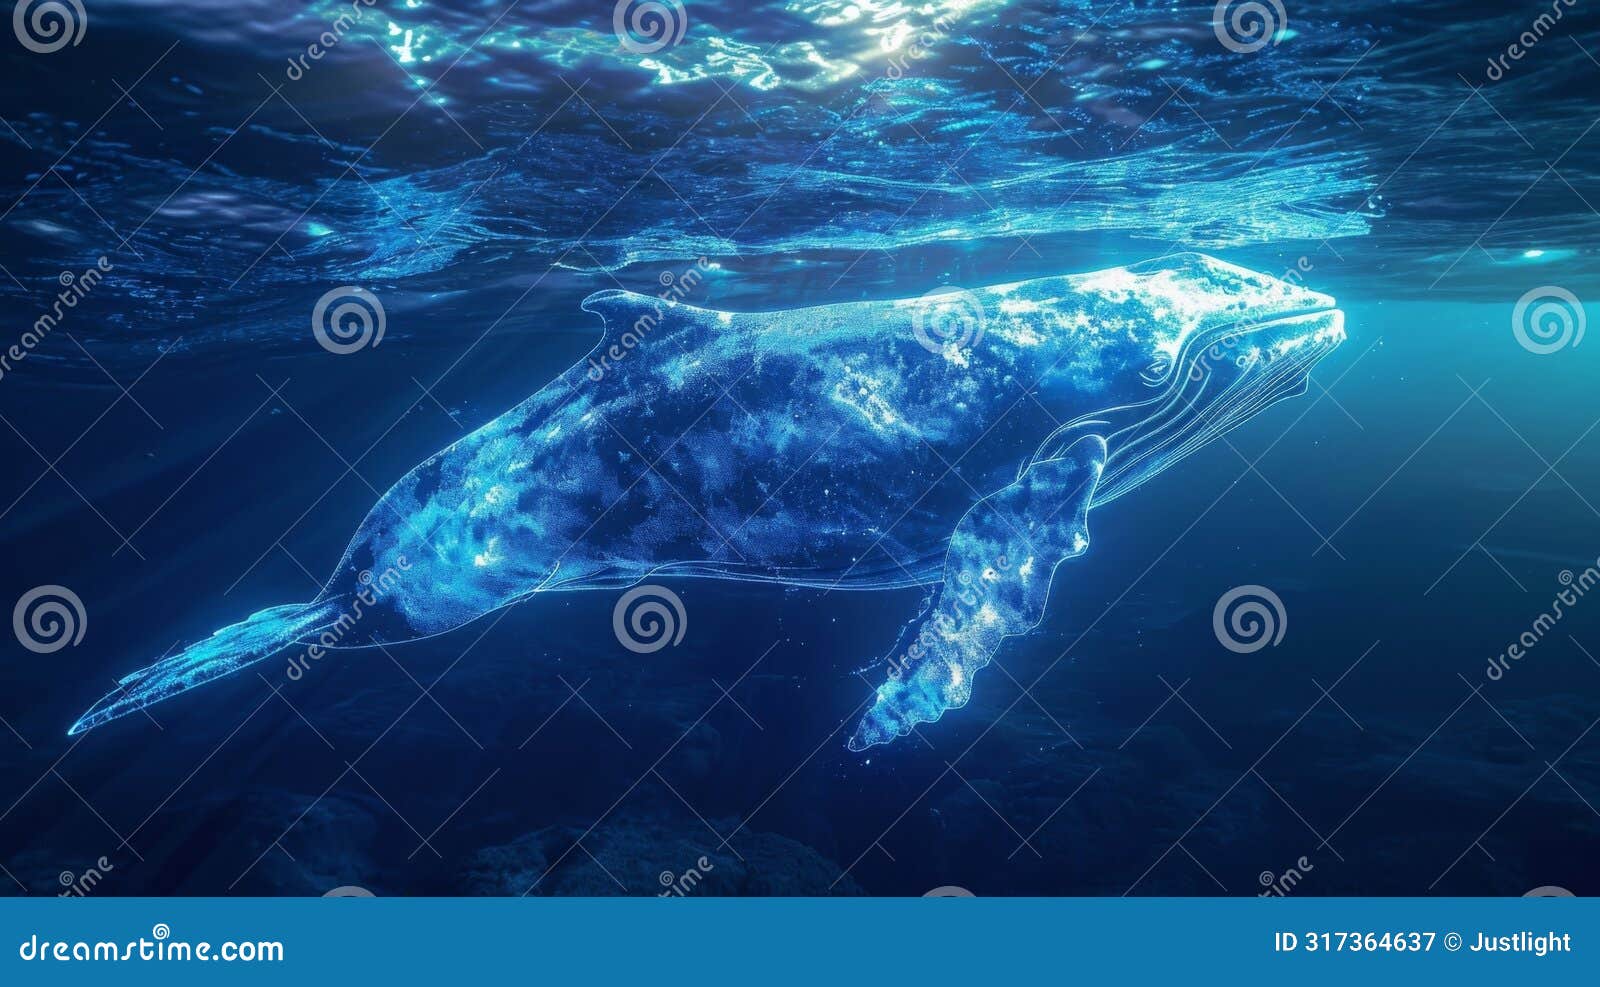 a holographic whale breaches the surface of the ocean izing the beauty and fragility of marine life and the need